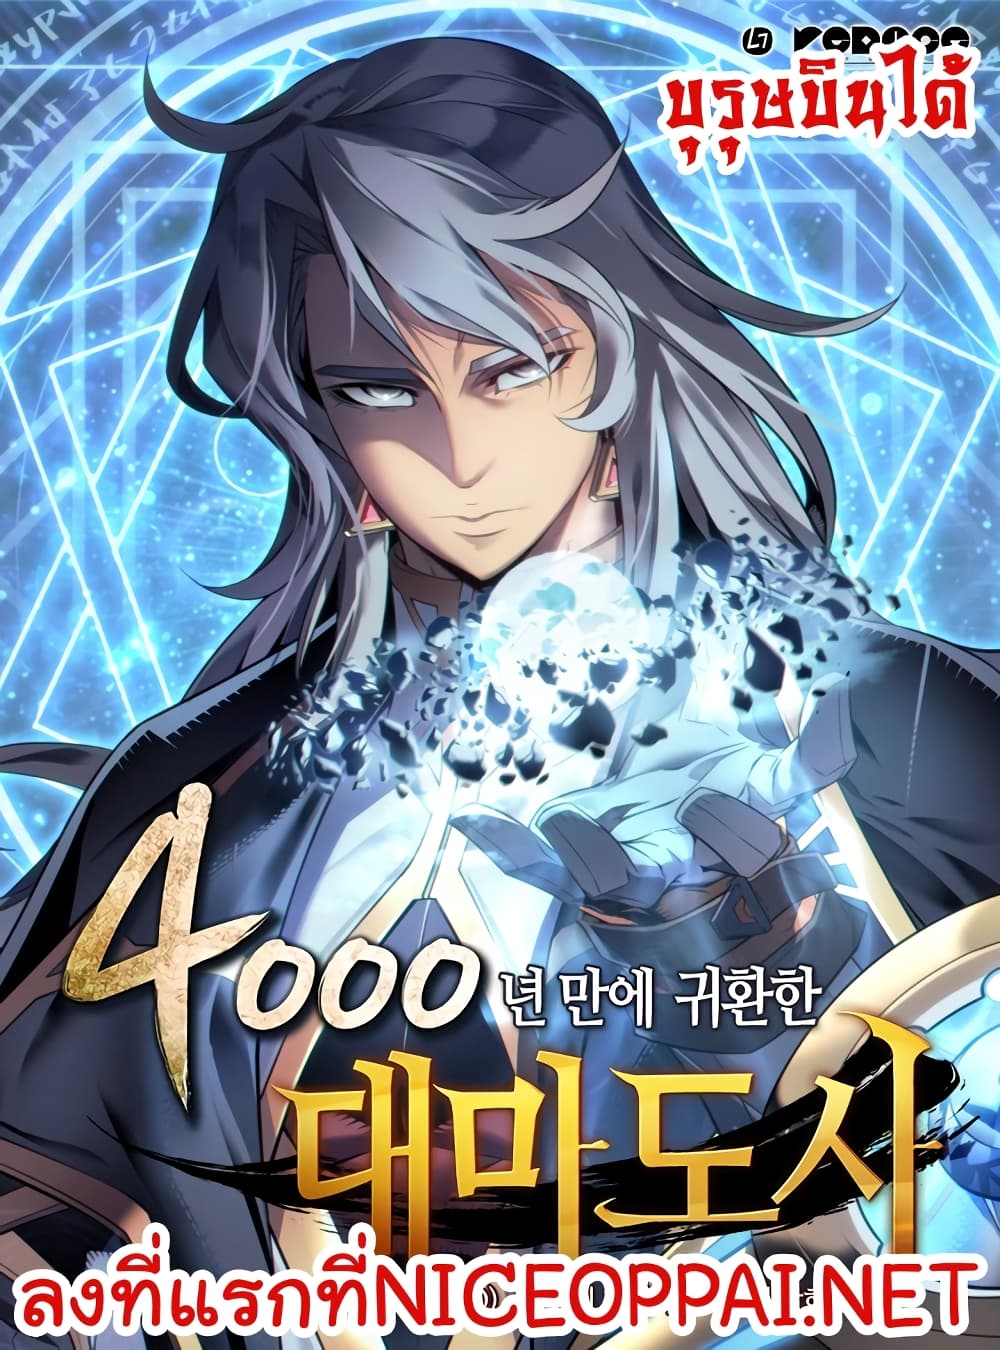 The Great Mage Returns After 4000 Years 38 (1)